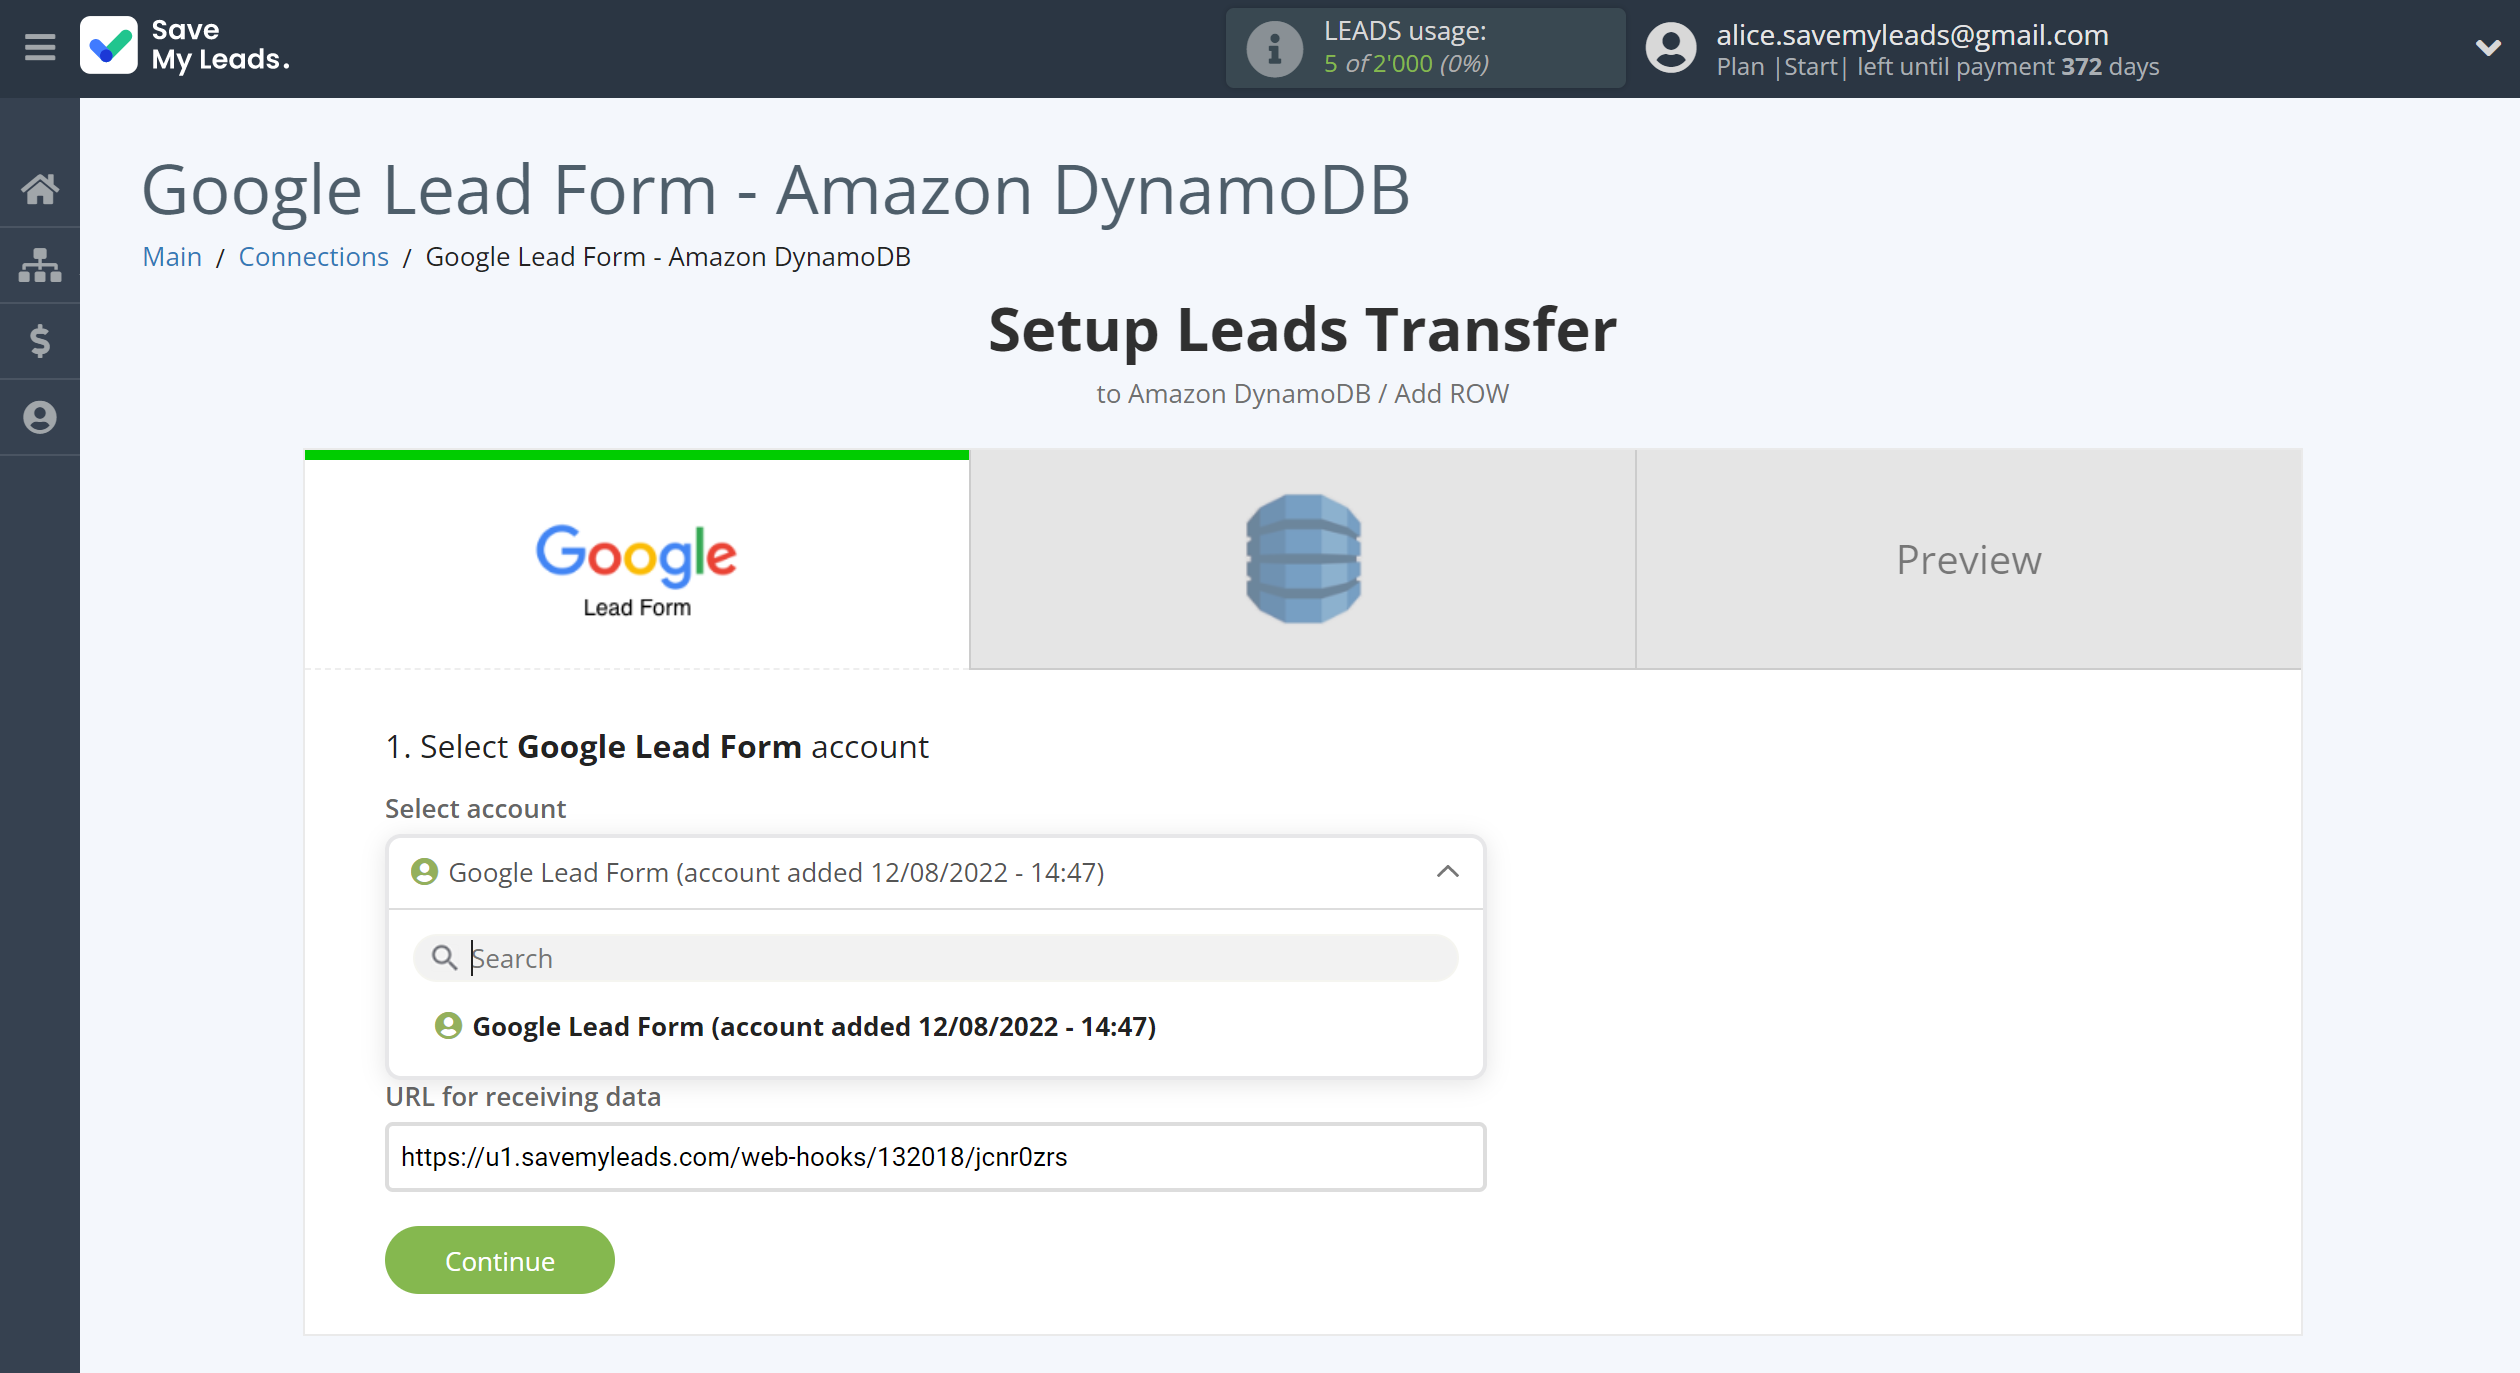 How to Connect Google Lead Form with Amazon DynamoDB | Data Source account selection